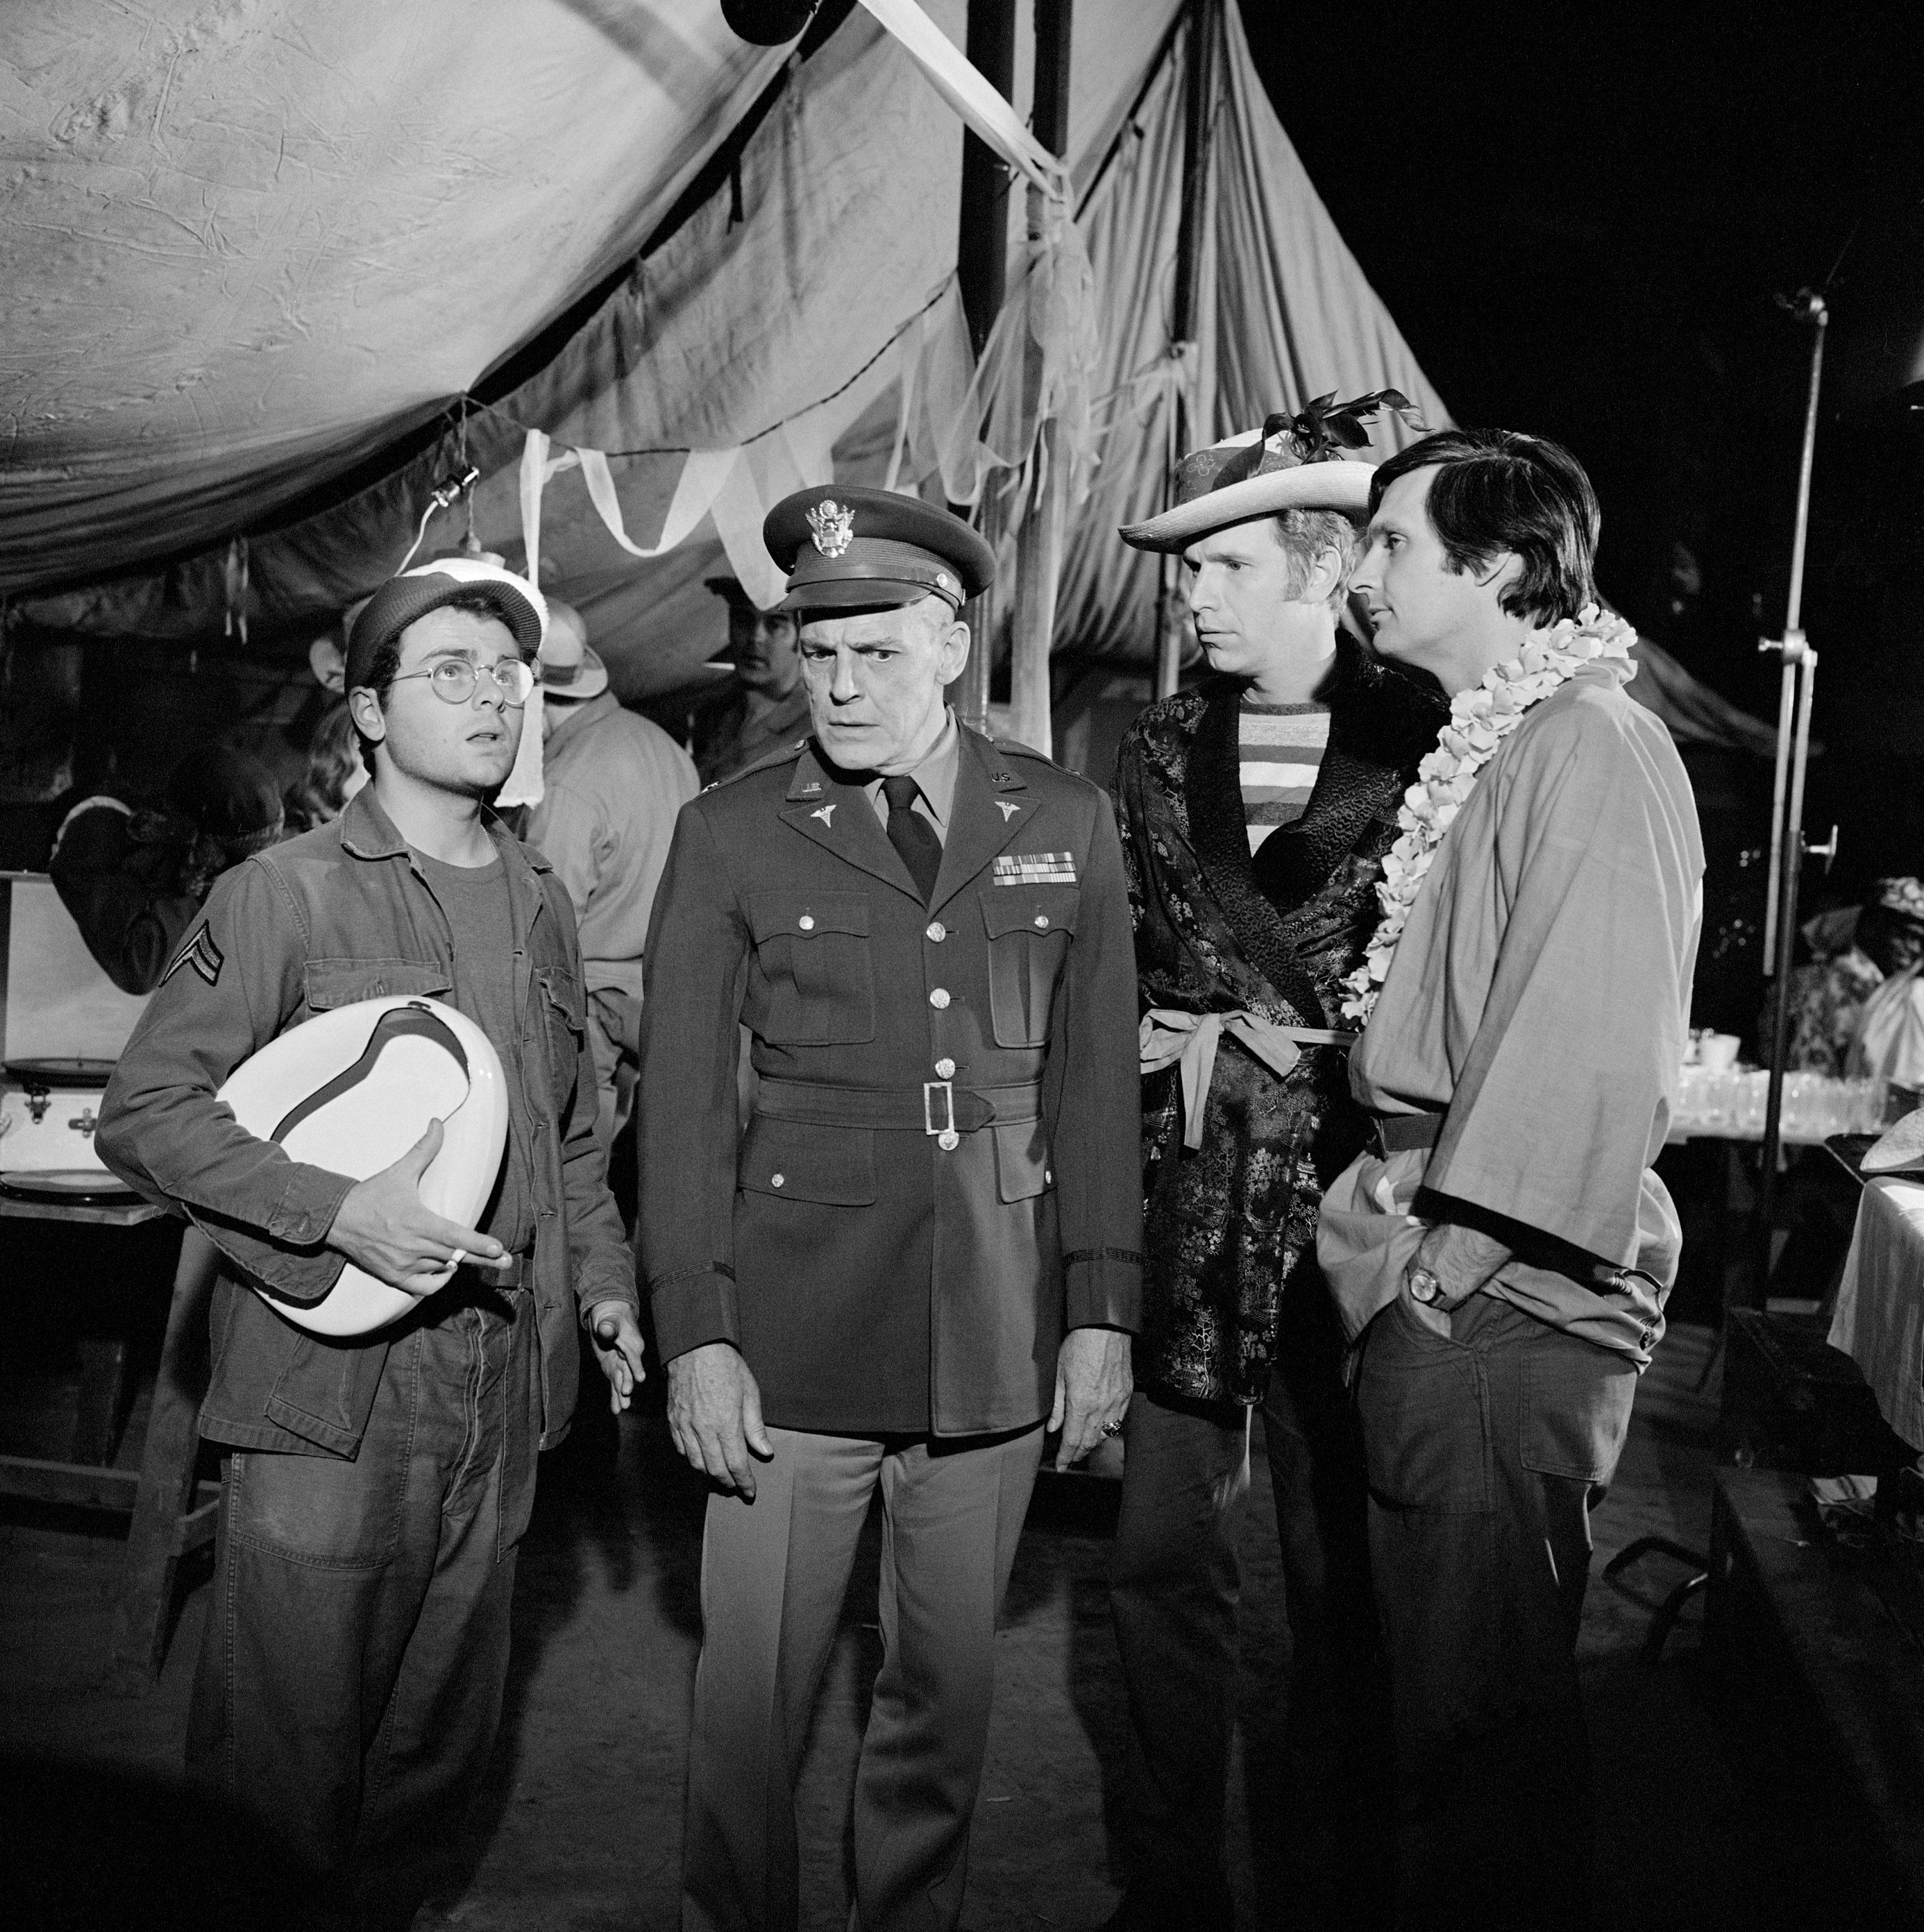 Gary Burghoff as Walter Eugene O'Reilly, G. Wood as Charlie Hammond, Wayne Rogers as John McIntyre, and Alan Alda as Benjamin Franklin Pierce in the pilot episode of M*A*S*H (MASH). Image date: April 13, 1972. | Source: Getty Images